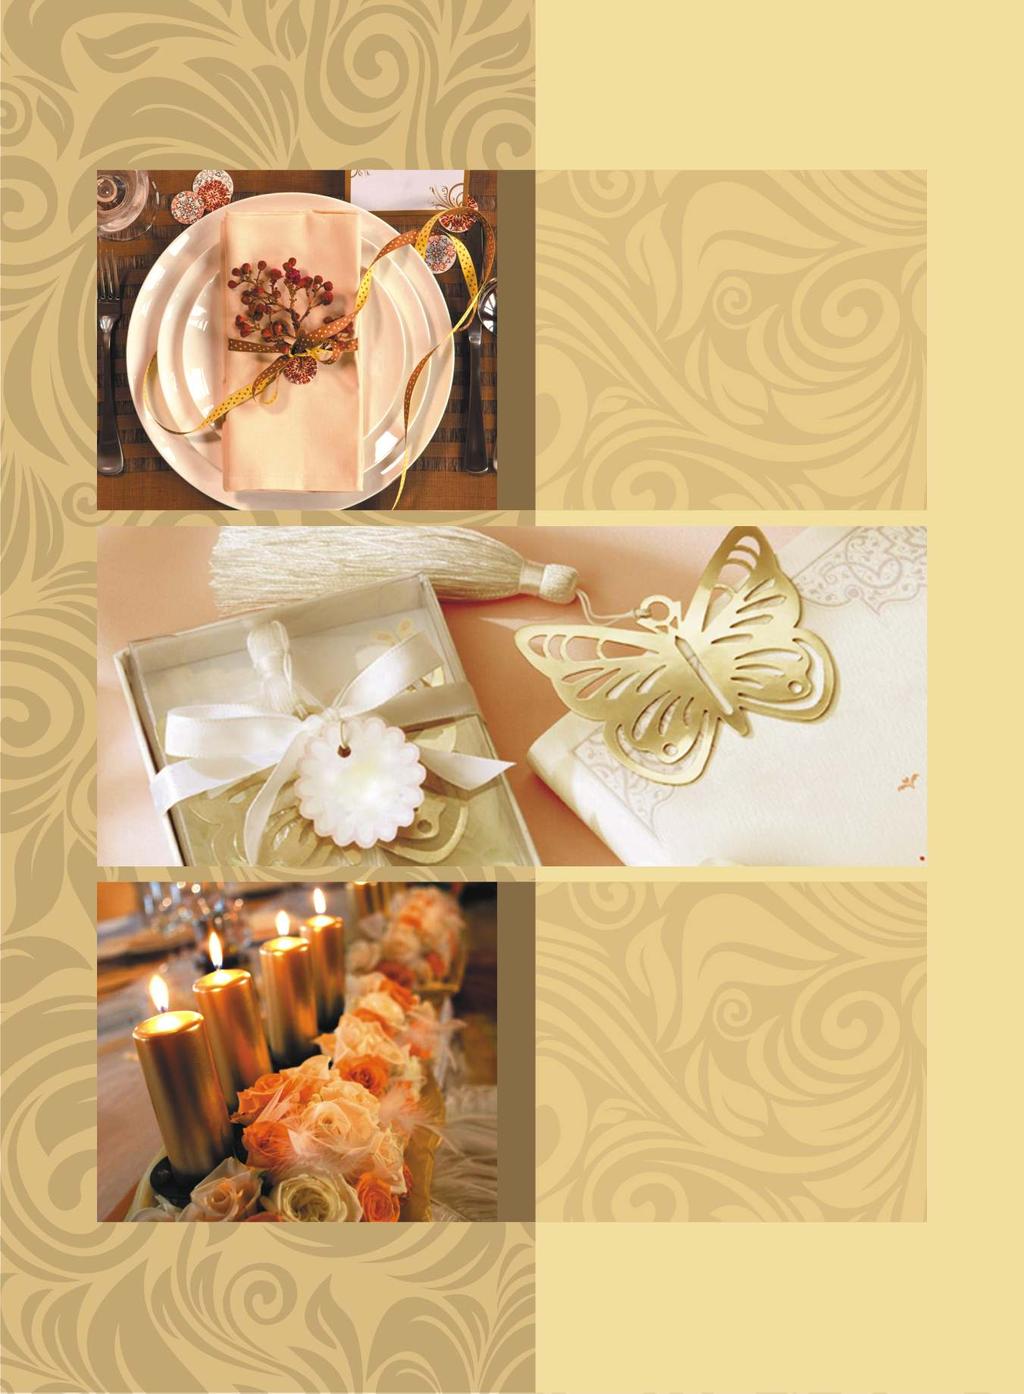 SERVICES SERVICES At Events Etc. we understand that the best service extends beyond providing great food in an exquisite setting, and rests on delivering the highest ideals of hospitality.